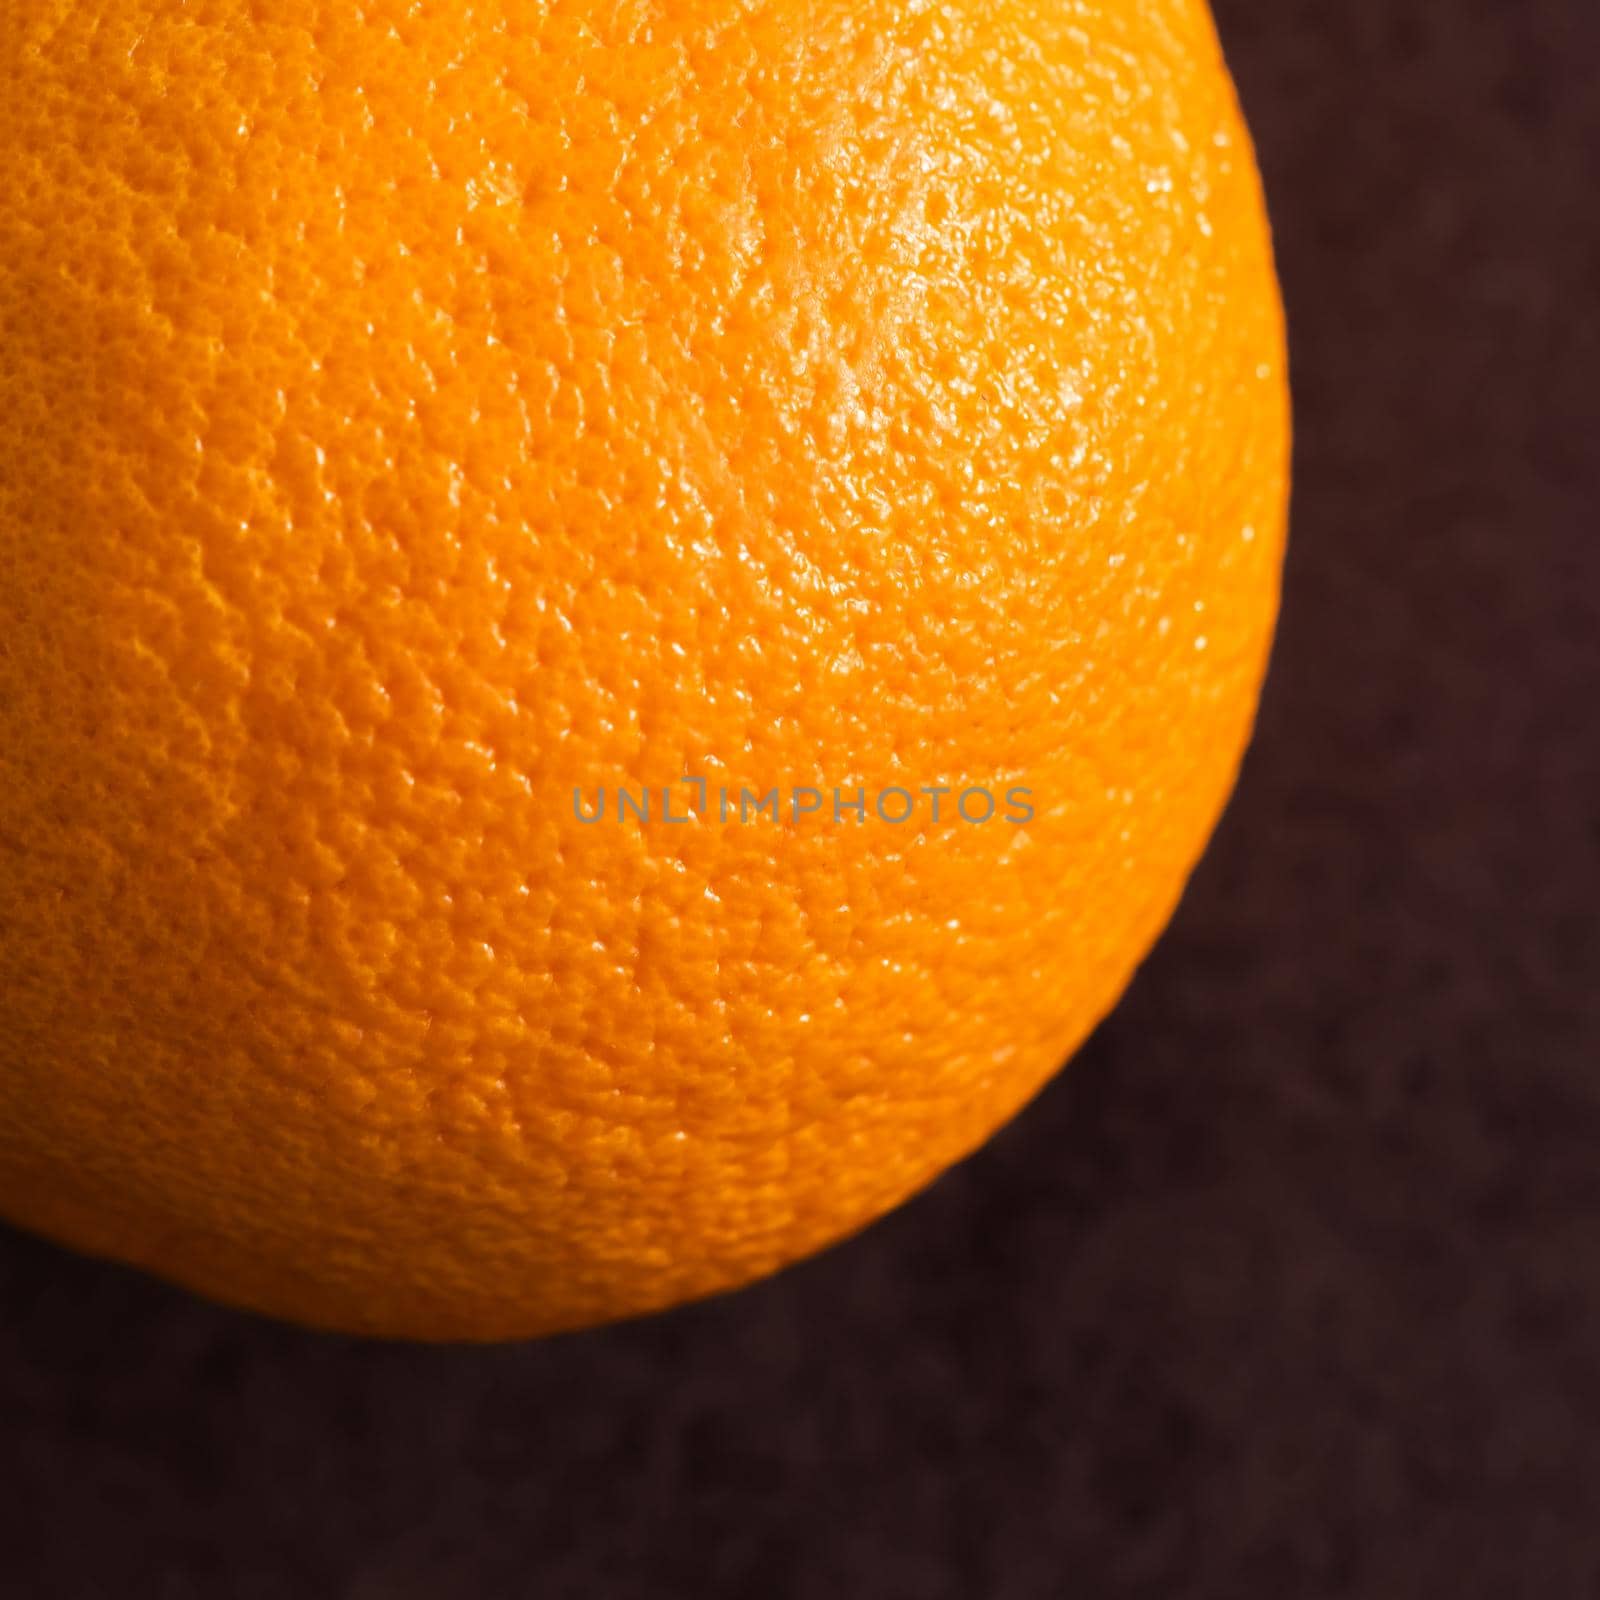 Ripe orange on a brown background. Close up view by Olayola